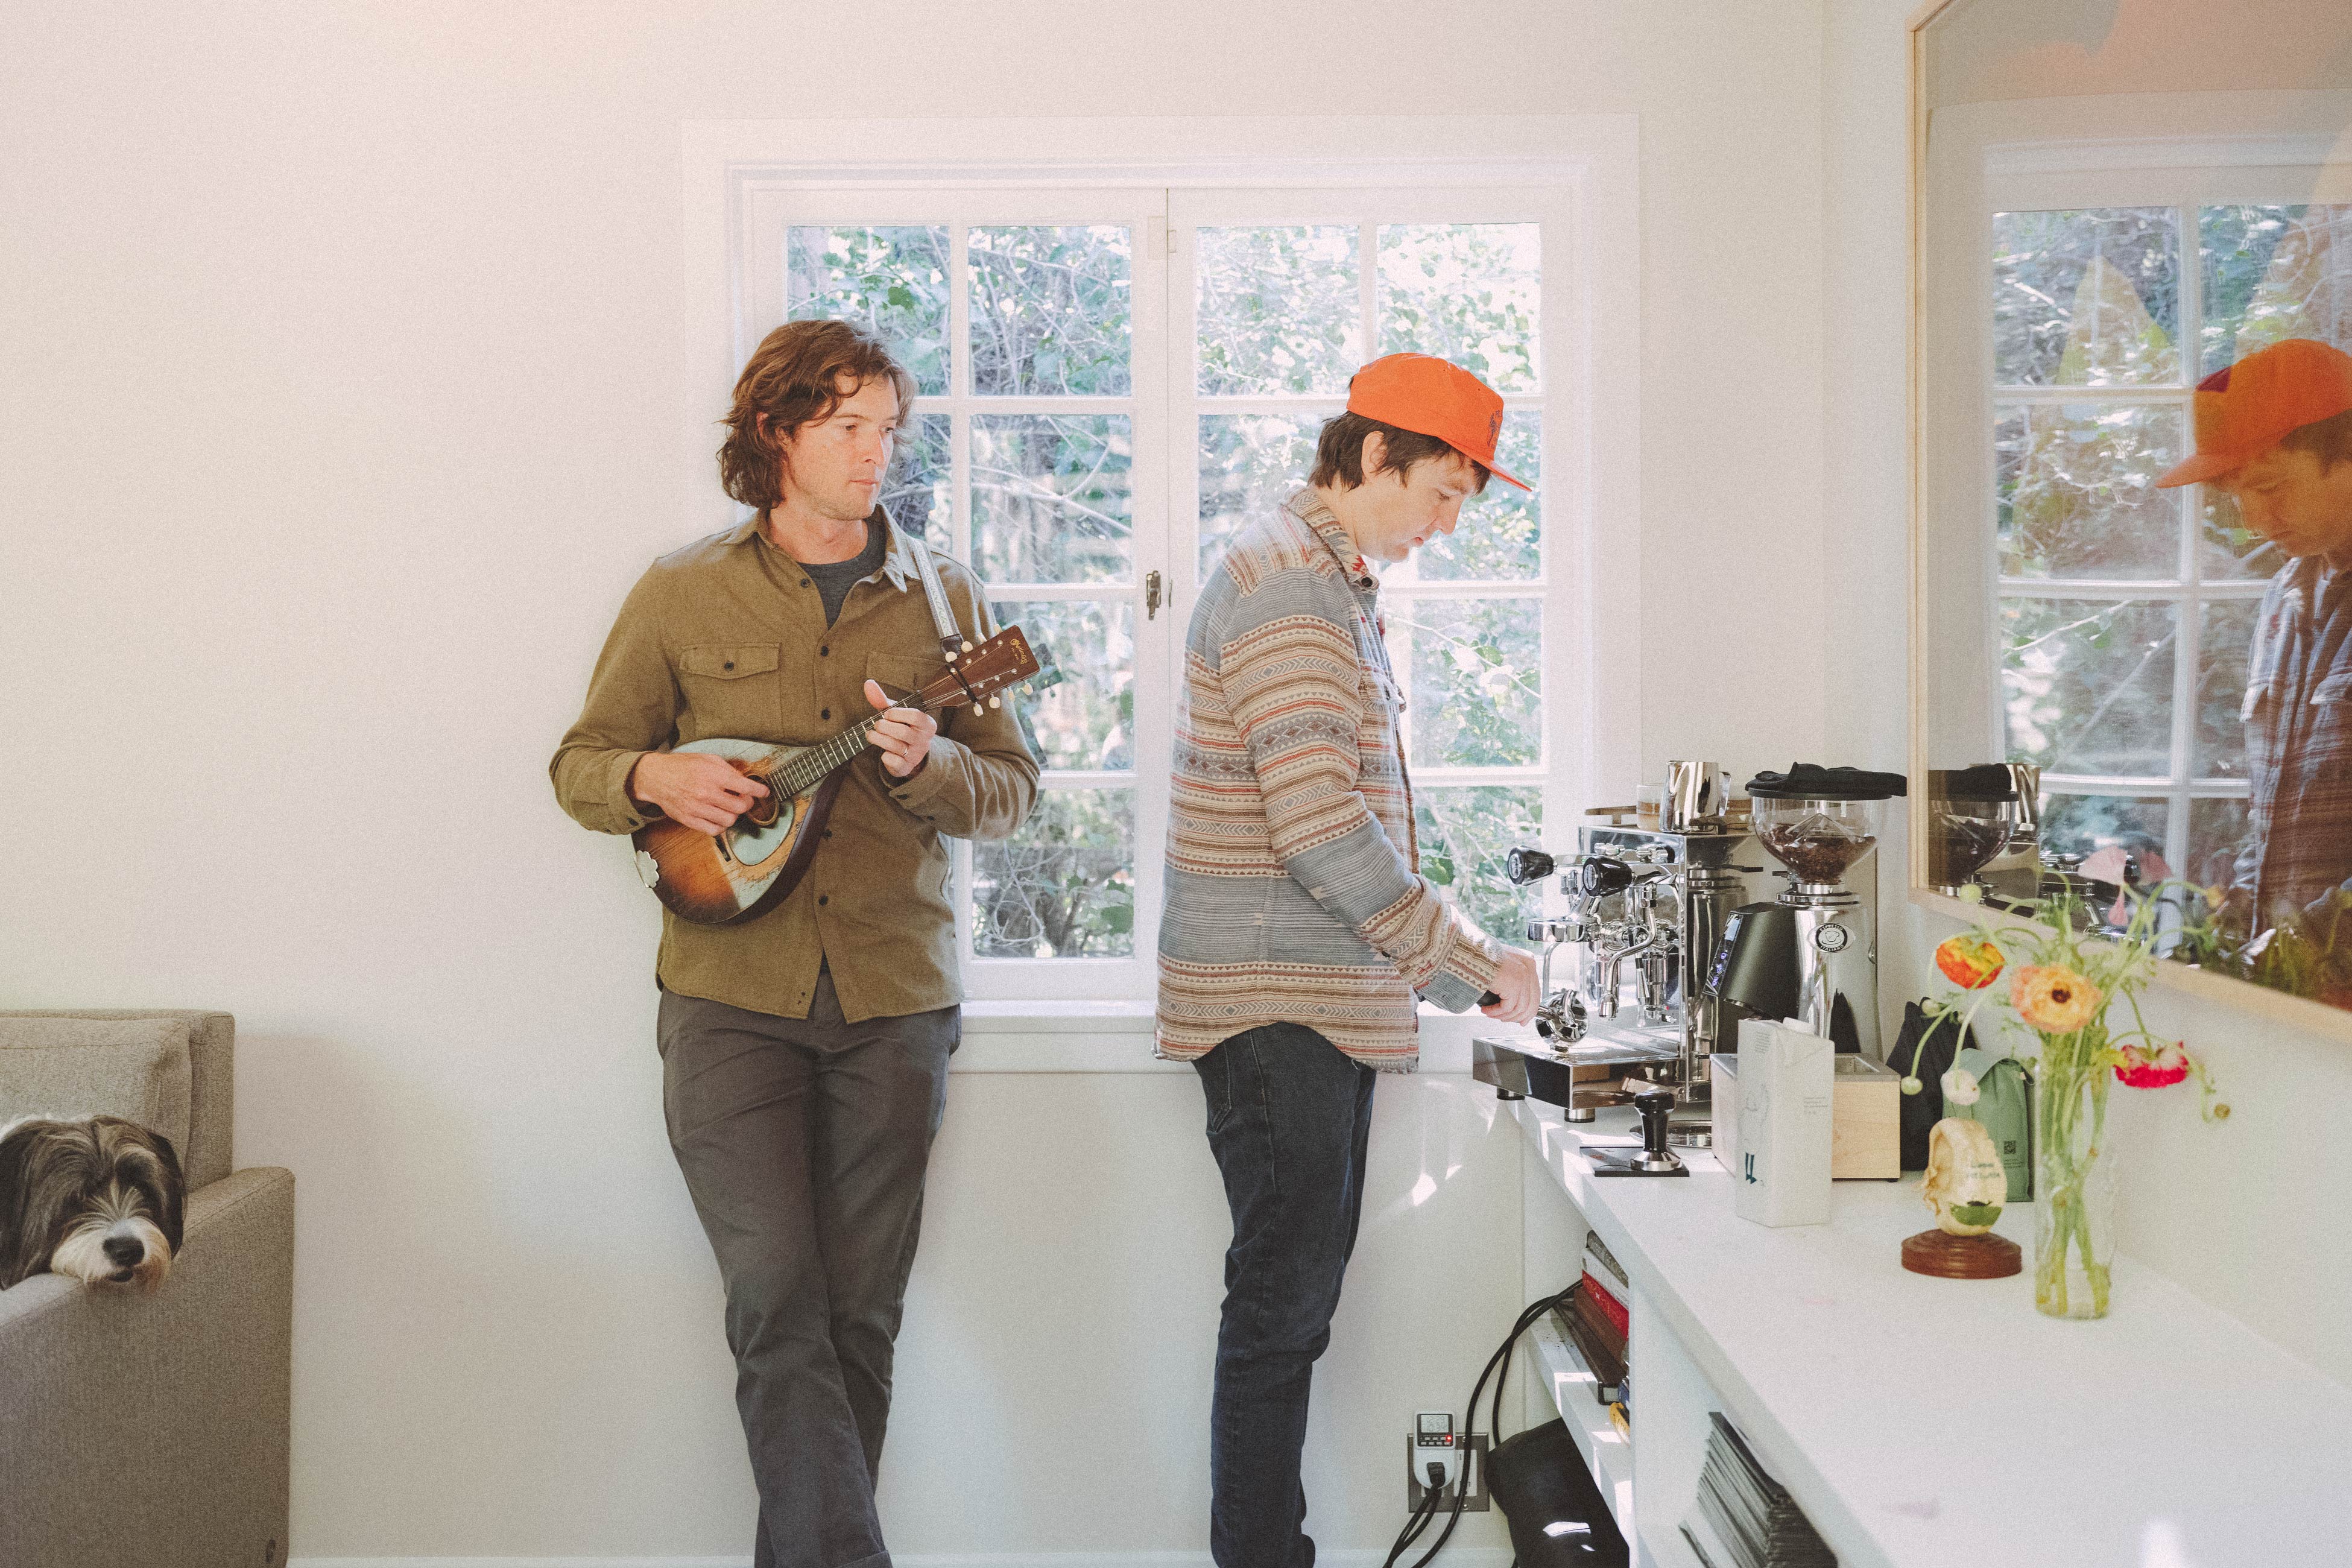 Milk Carton Kids in kitchen making coffee and playing the ukelele. 